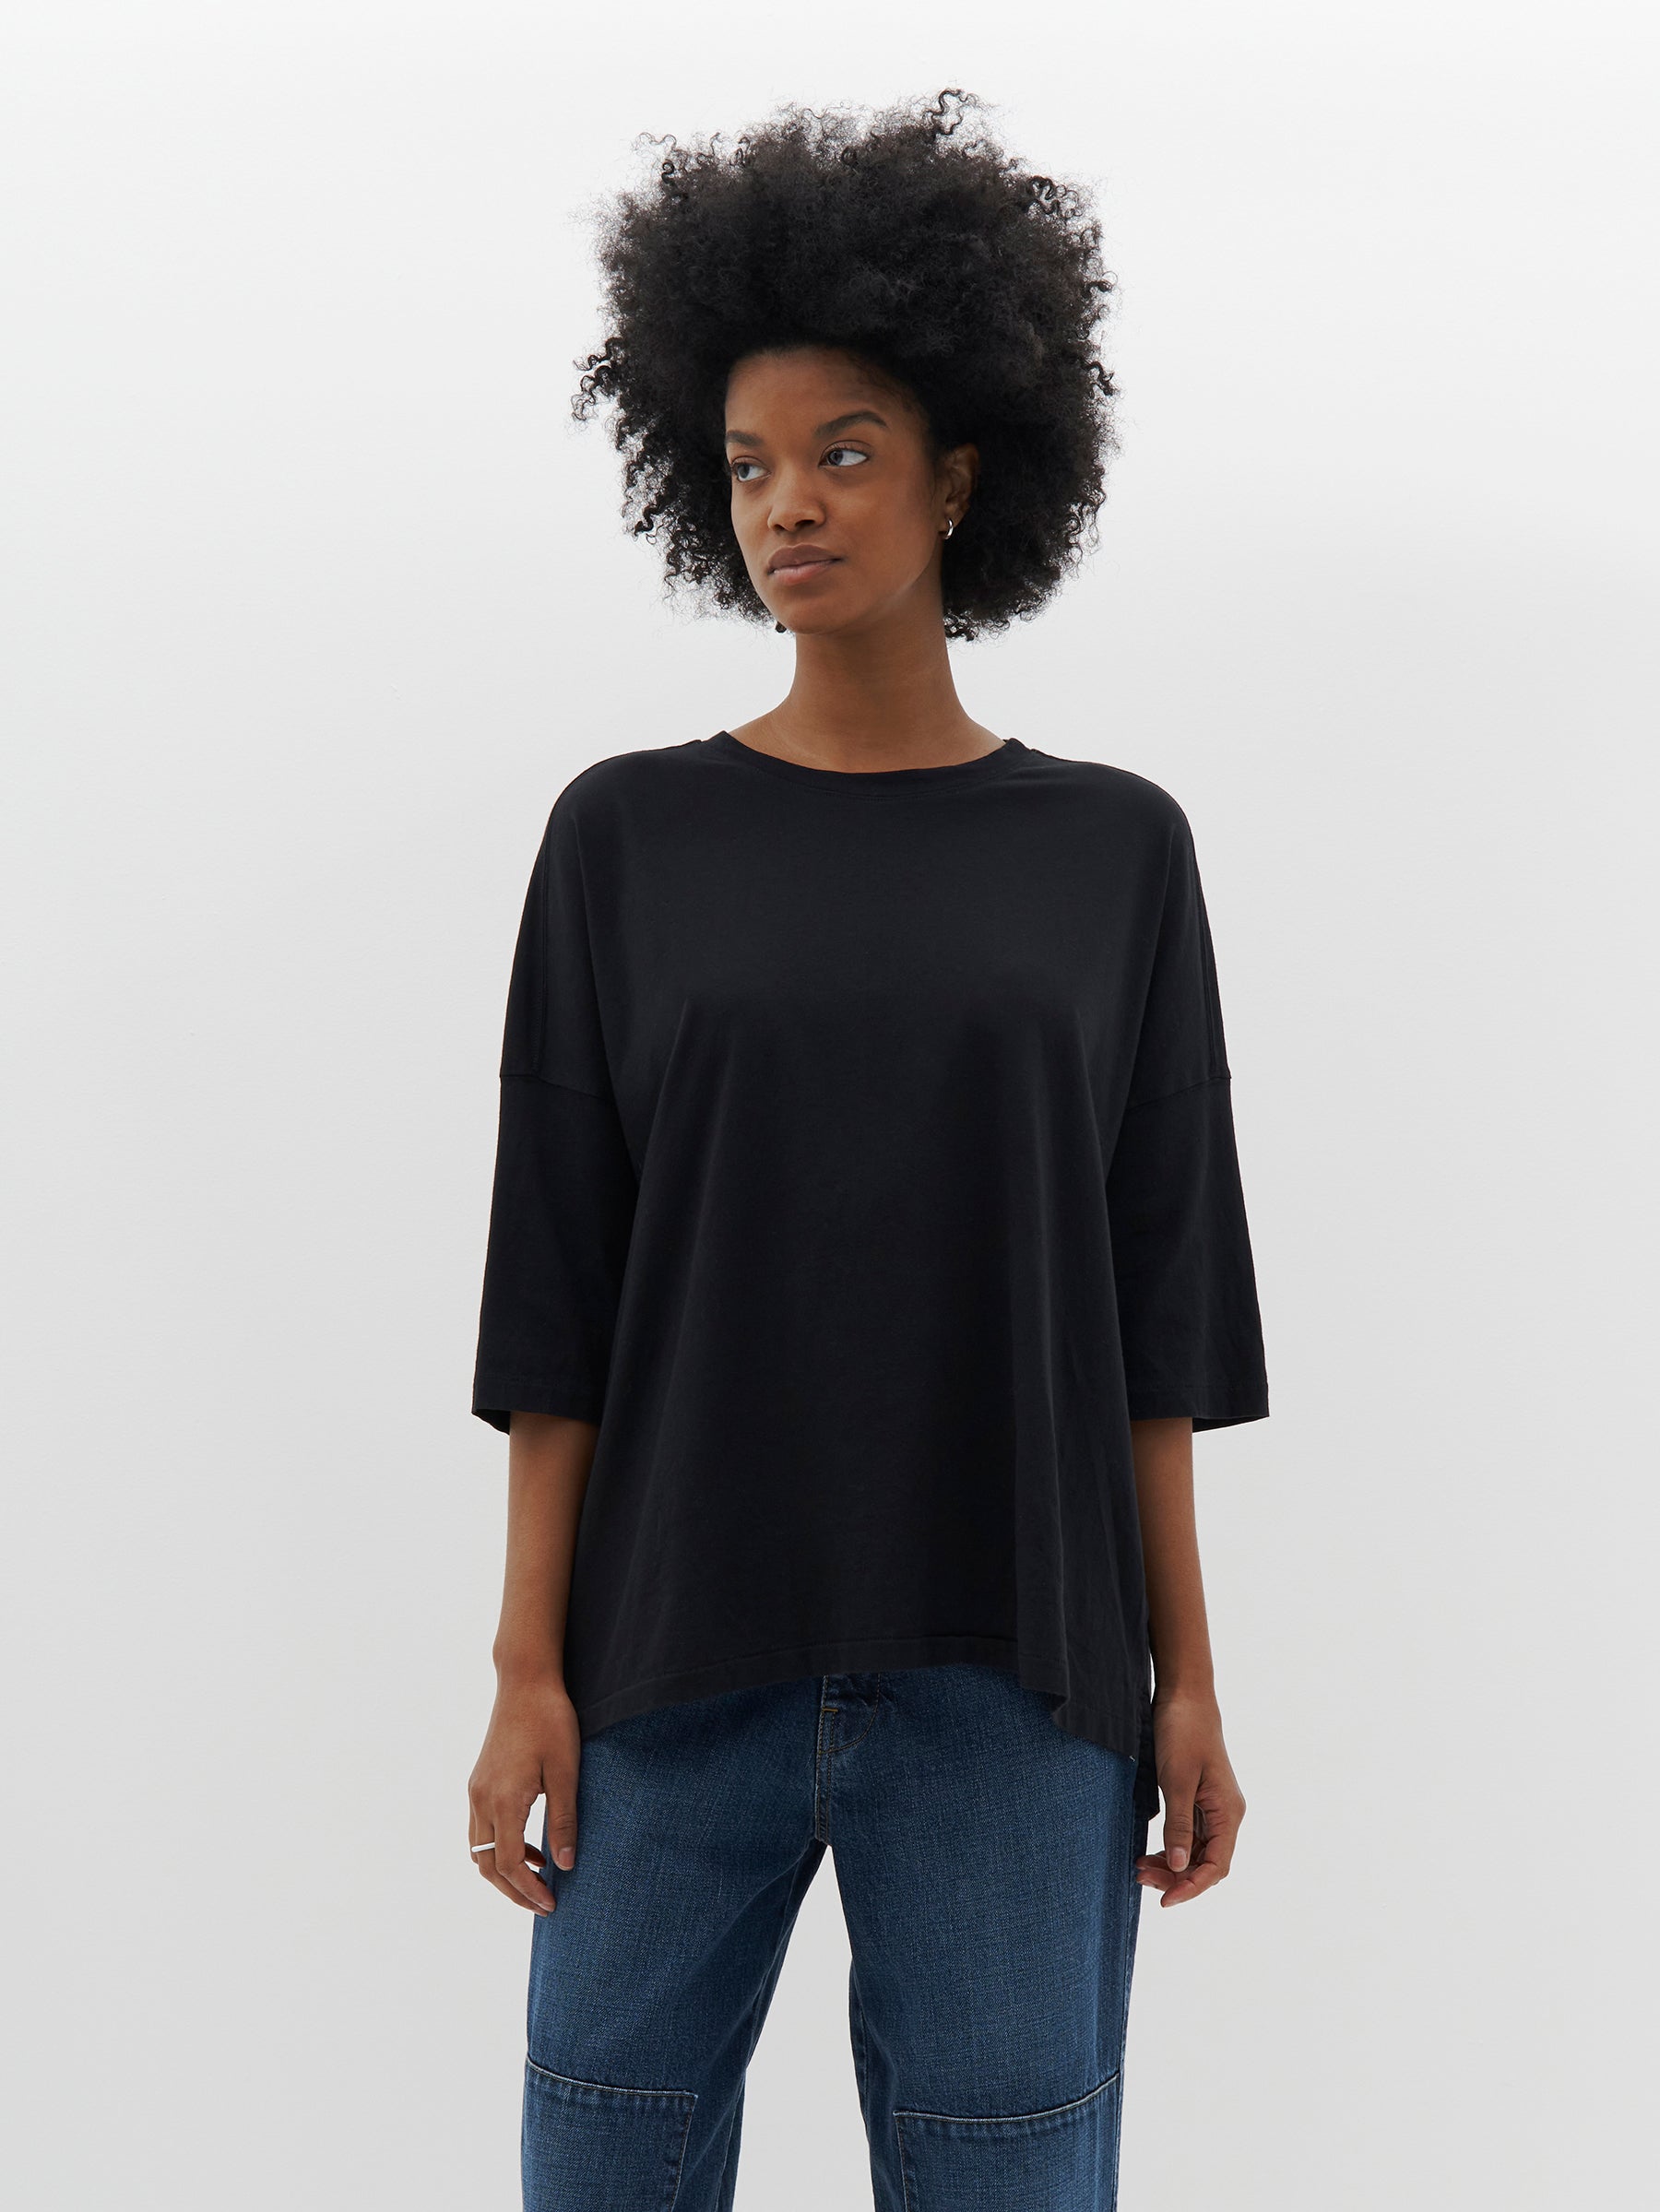 slouch side step short sleeve t.shirt in black